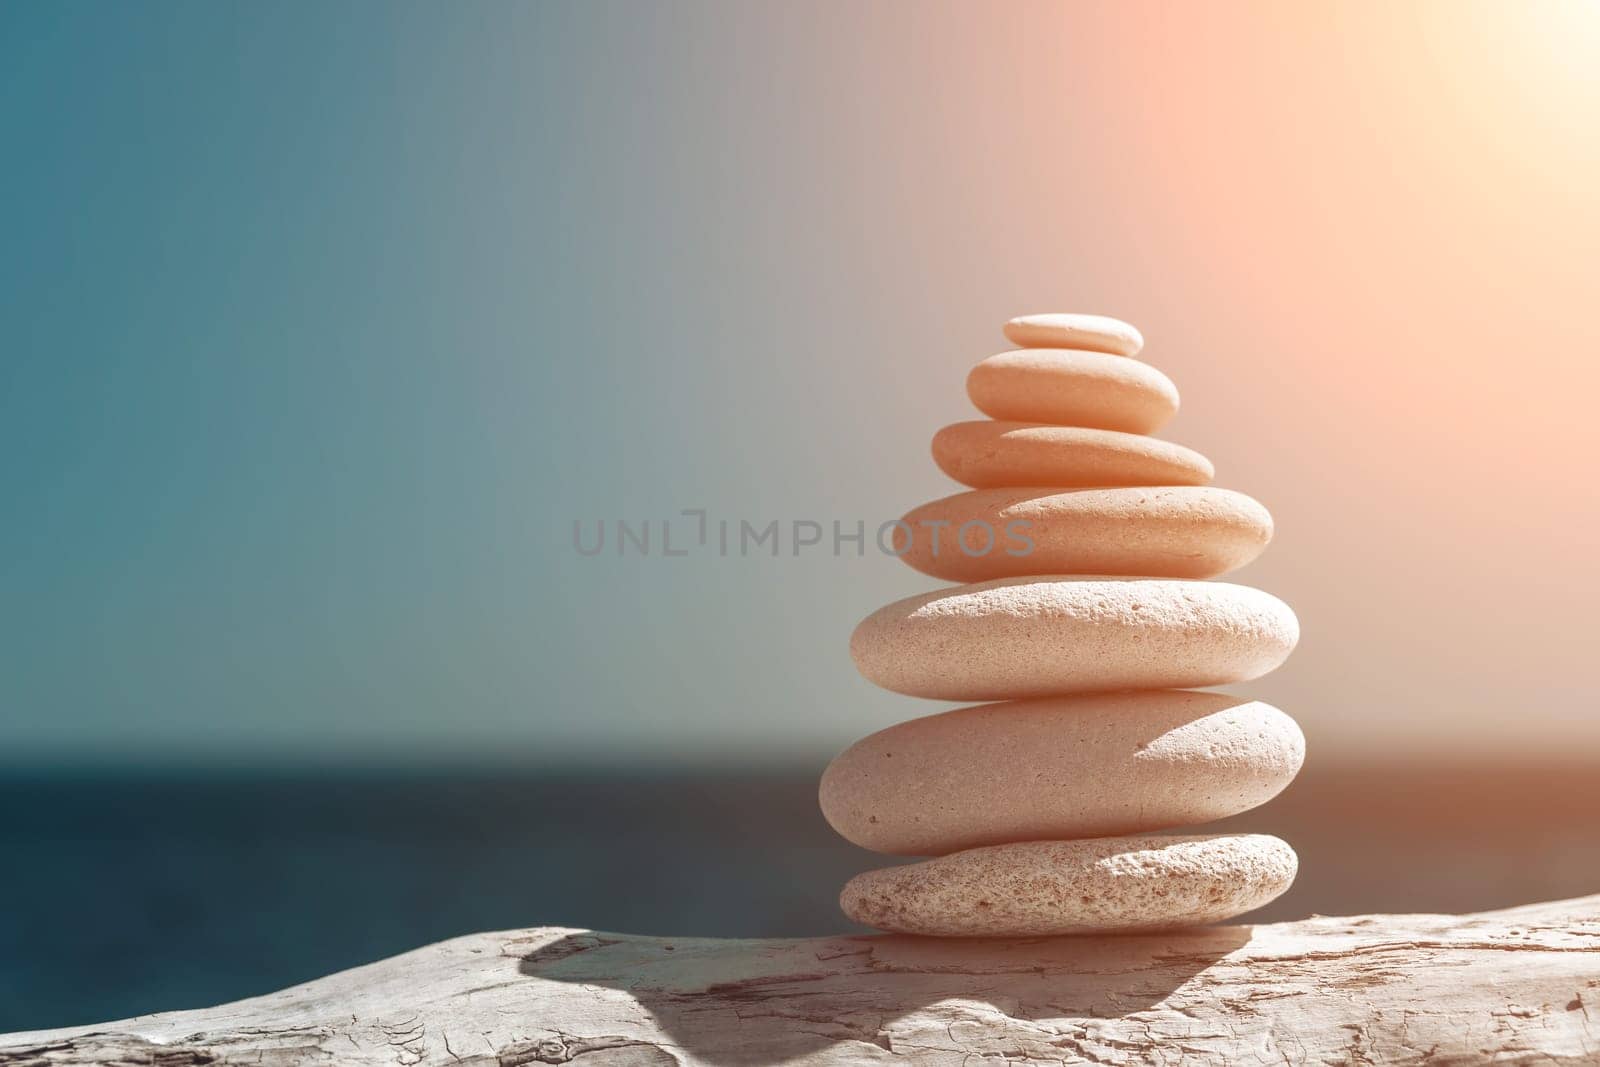 Pyramid stones on the seashore with warm sunset on the sea background. Happy holidays. Pebble beach, calm sea, travel destination. Concept of happy vacation on the sea, meditation, spa, calmness.